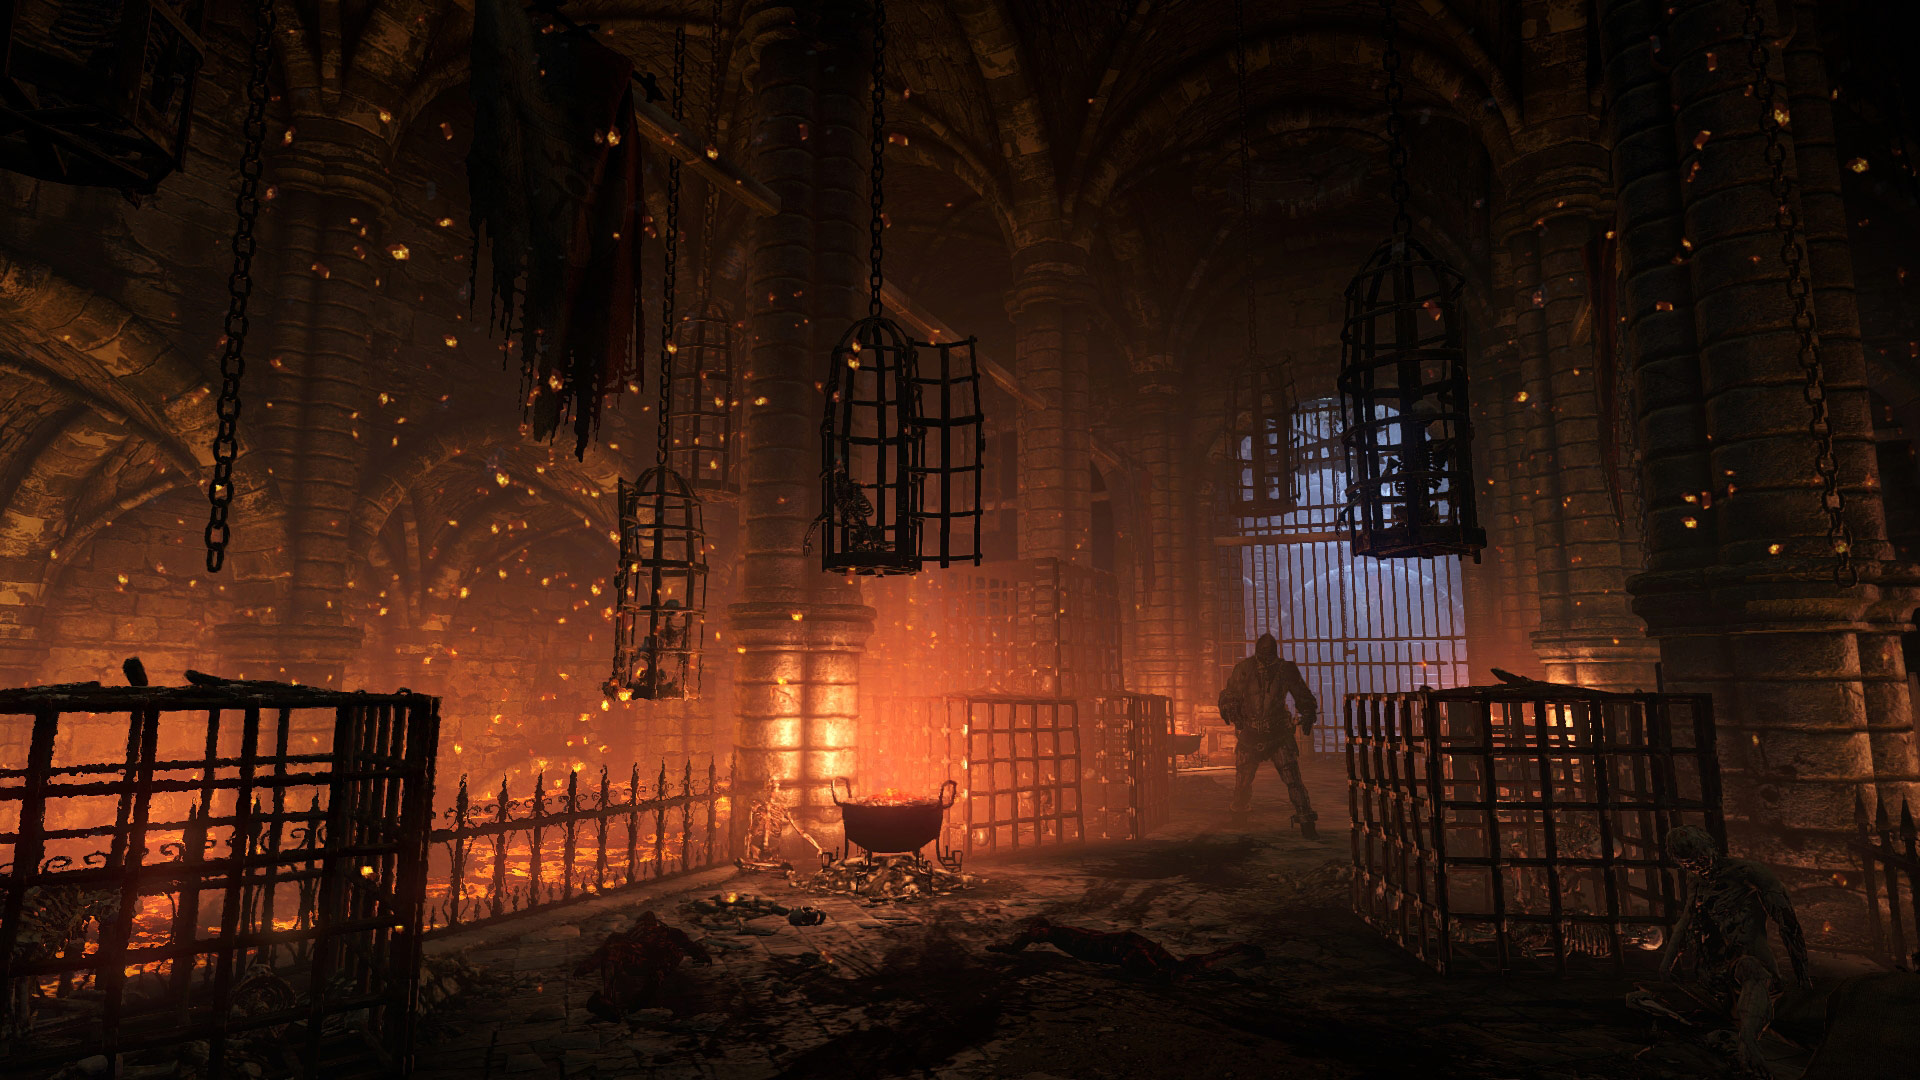 Video Game Hellraid HD Wallpaper | Background Image